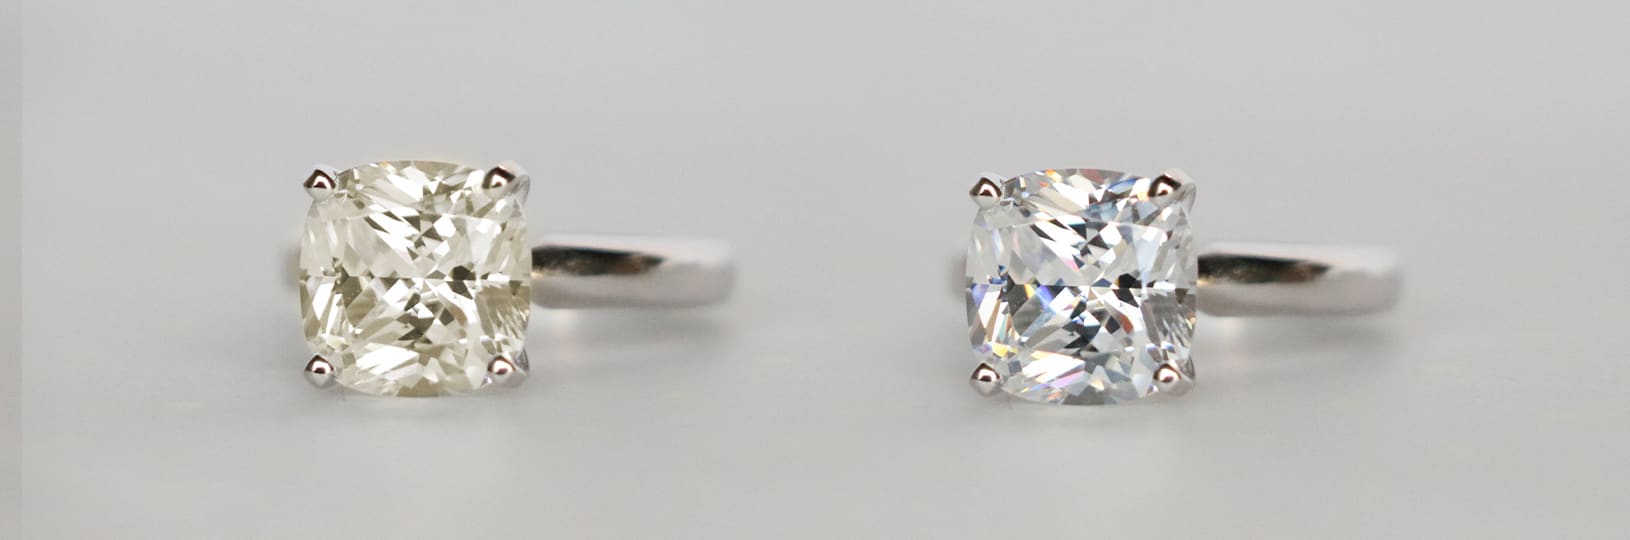 Diamond color compared side by side